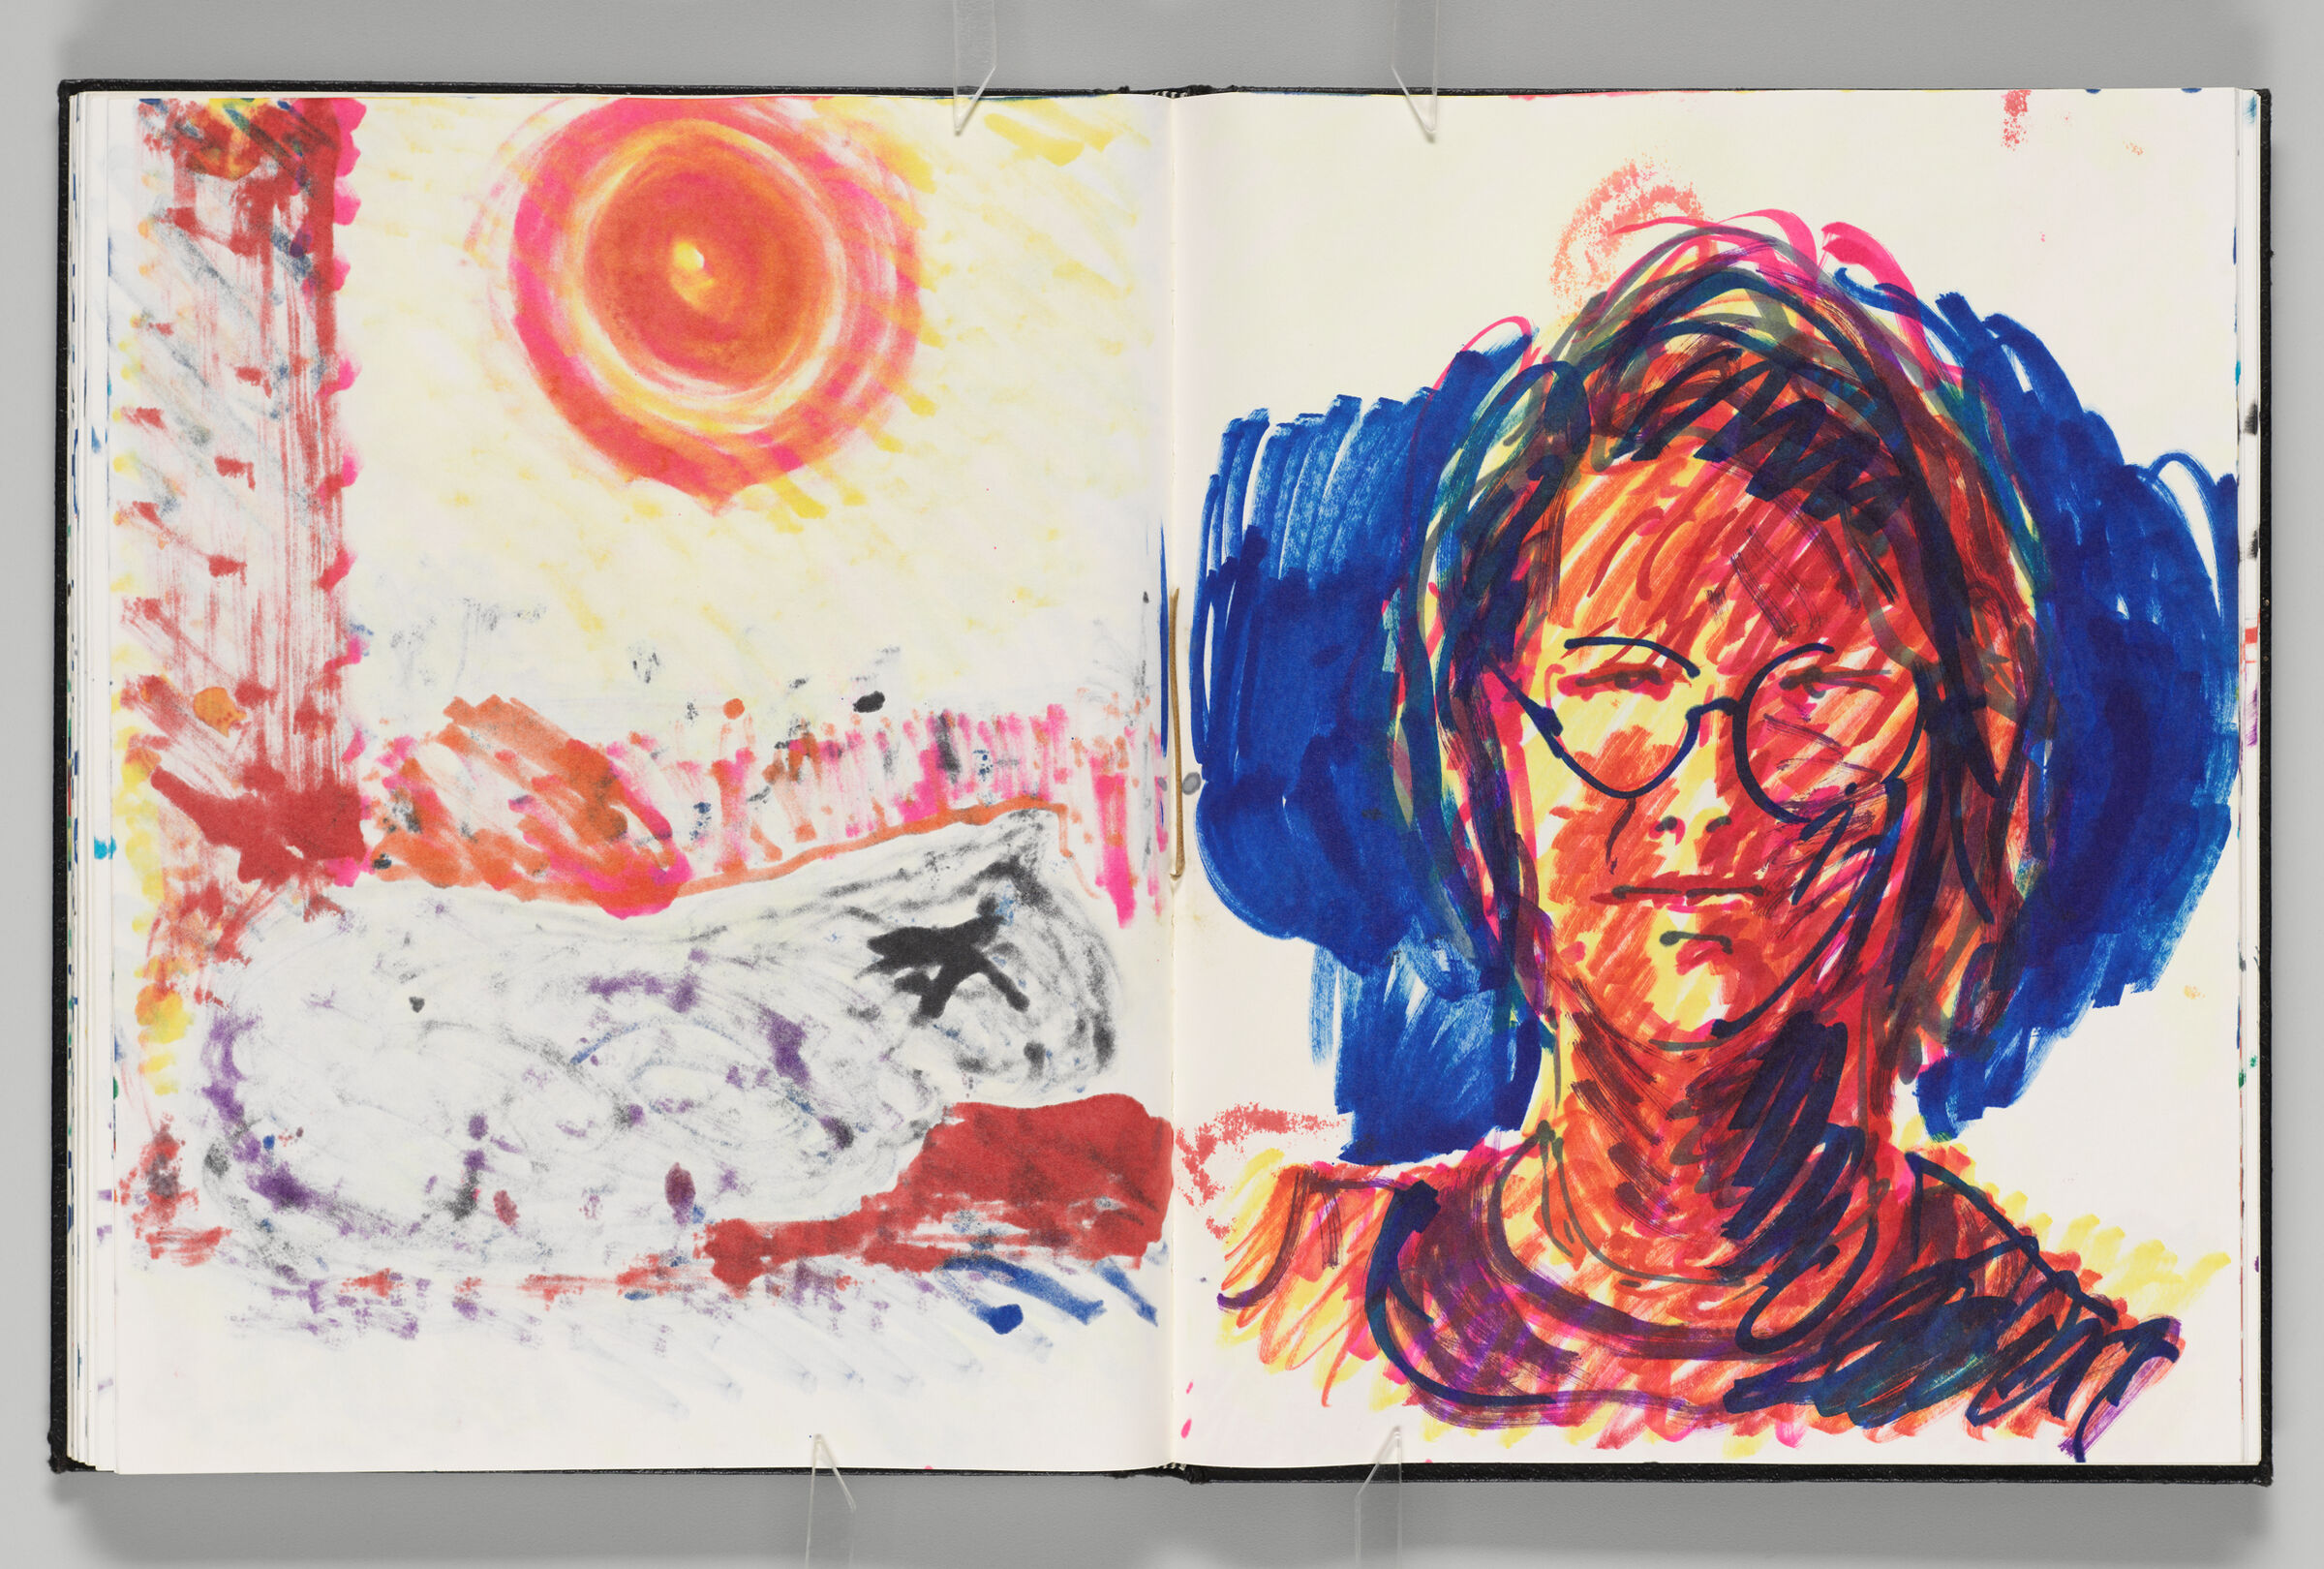 Untitled (Bleed-Through Of Previous Page, Left Page); Untitled (Frontal Portrait Of Female Figure In Glasses [Elizabeth], Right Page)